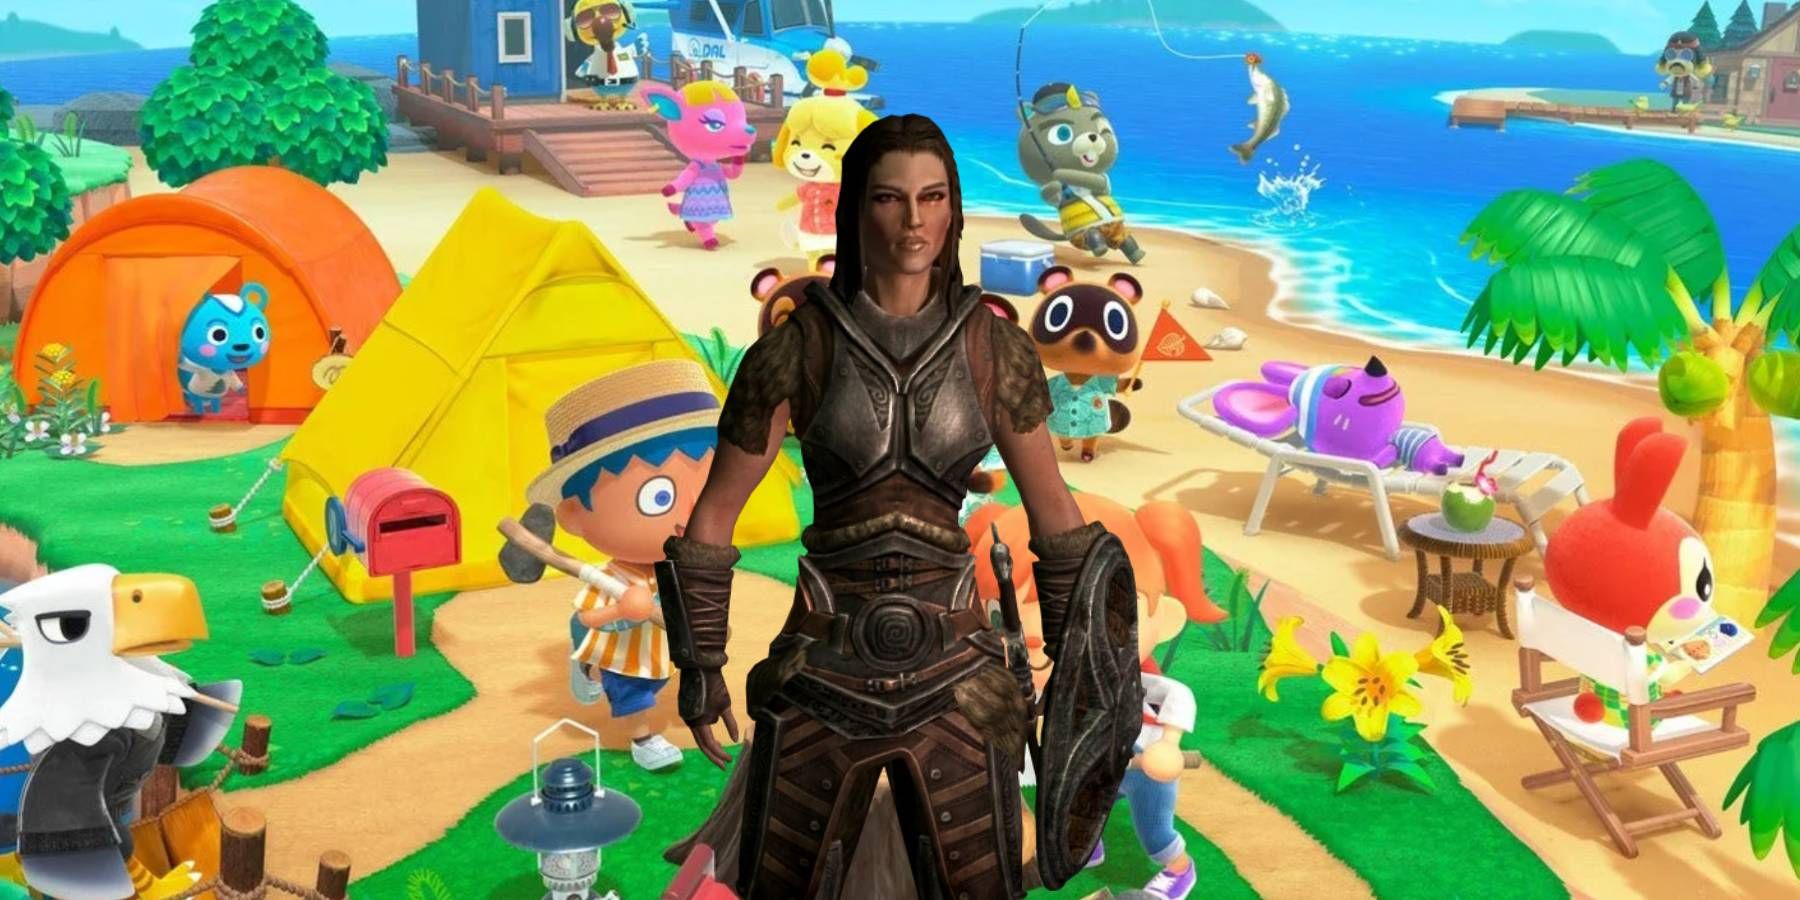 Lydia from Skyrim on art for Animal Crossing: New Horizons